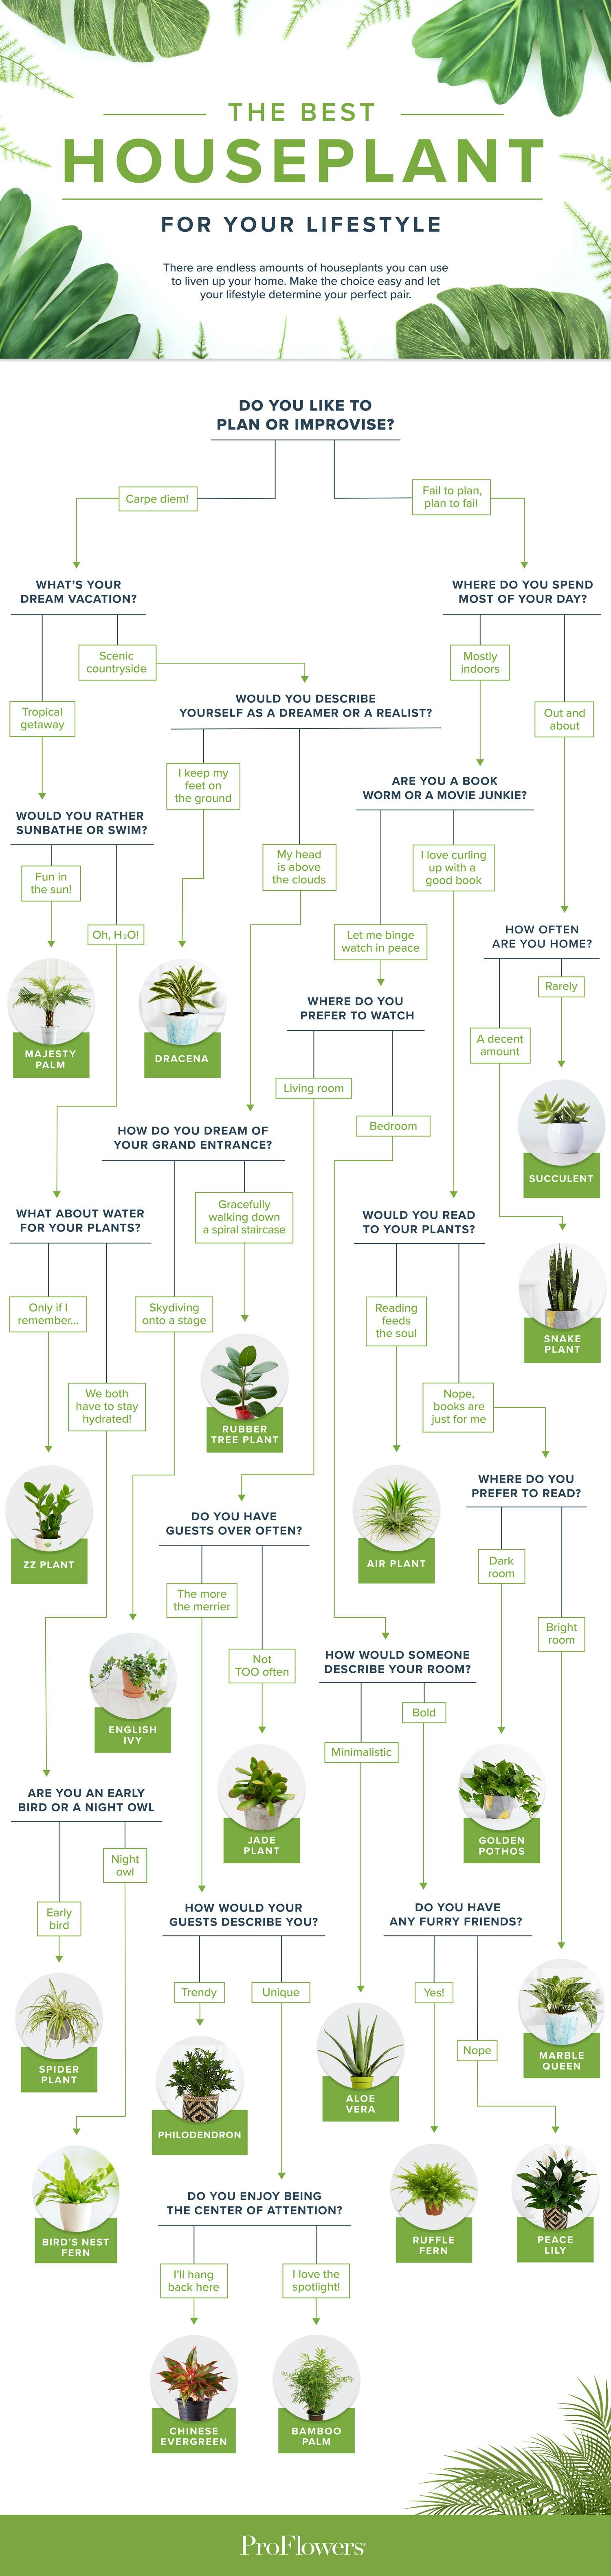 The Best Houseplant for Your Lifestyle